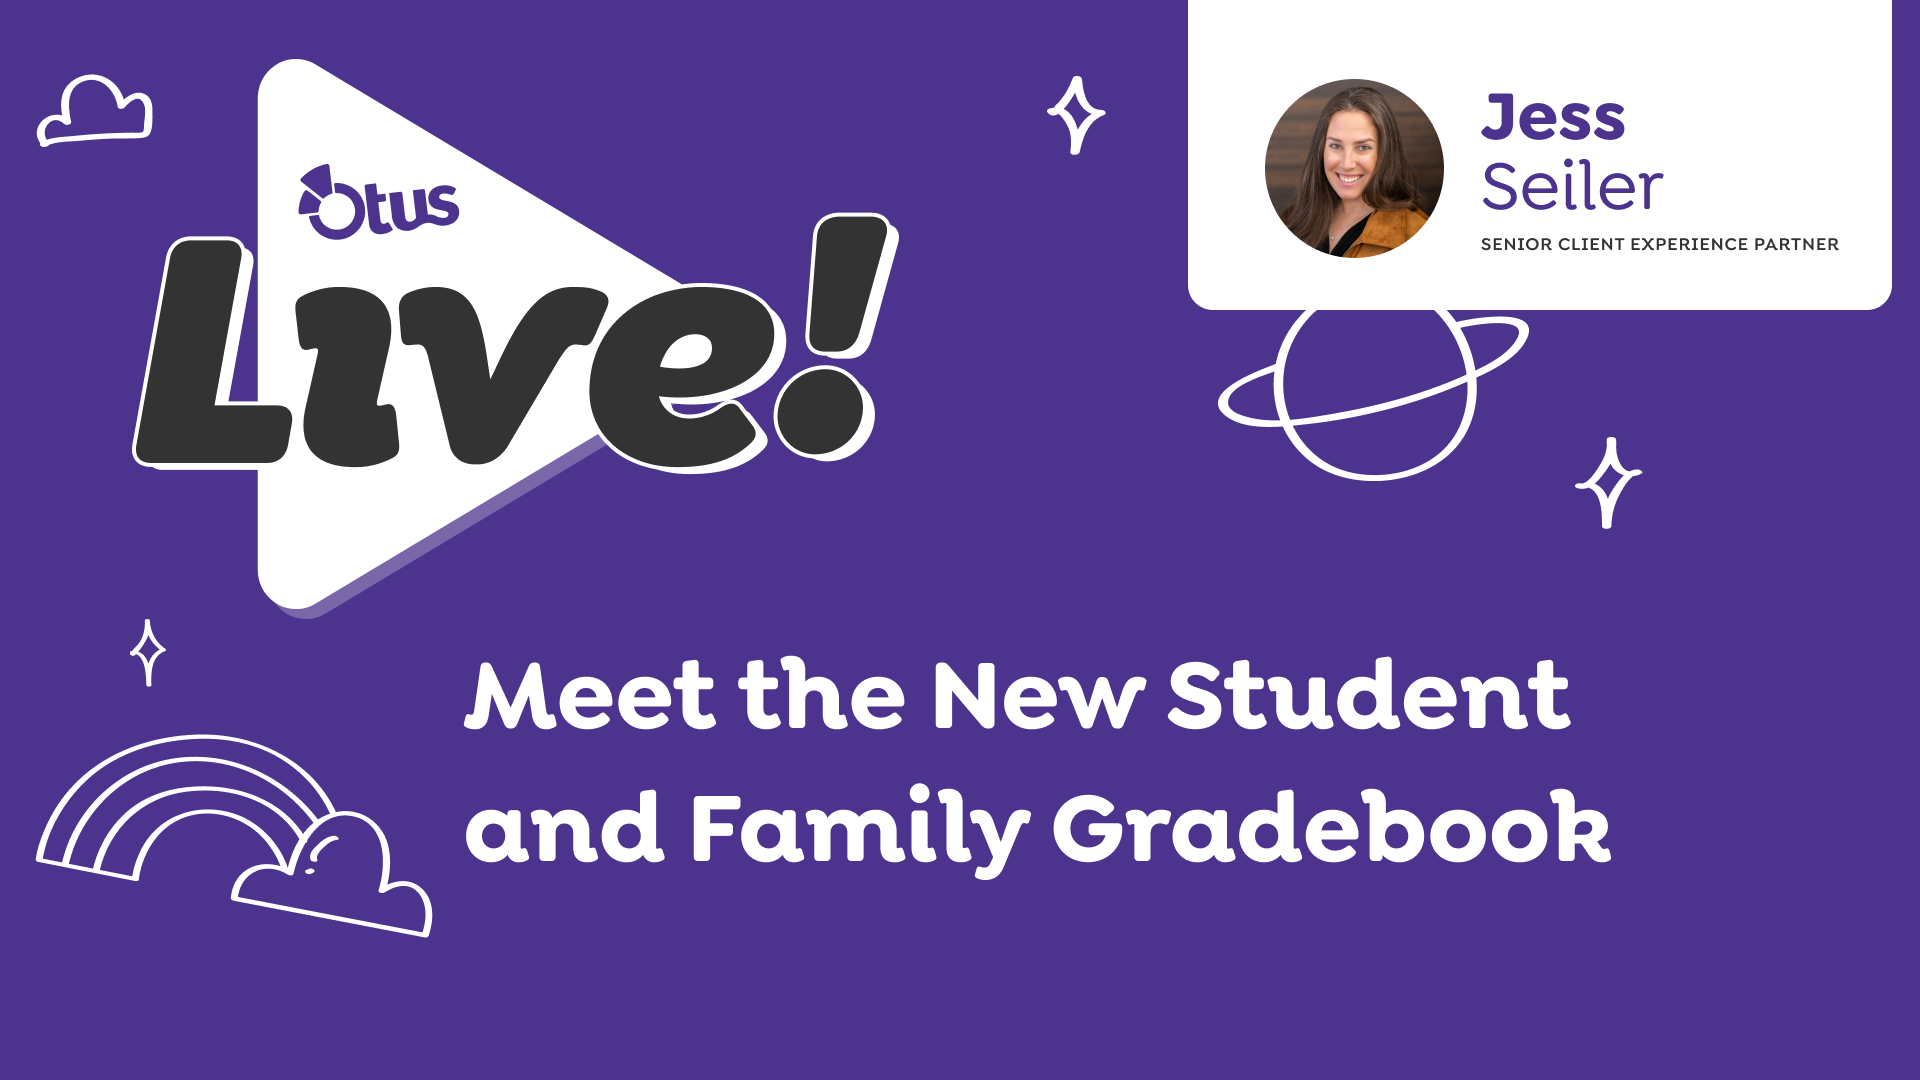 Meet the New Student and Family Gradebook